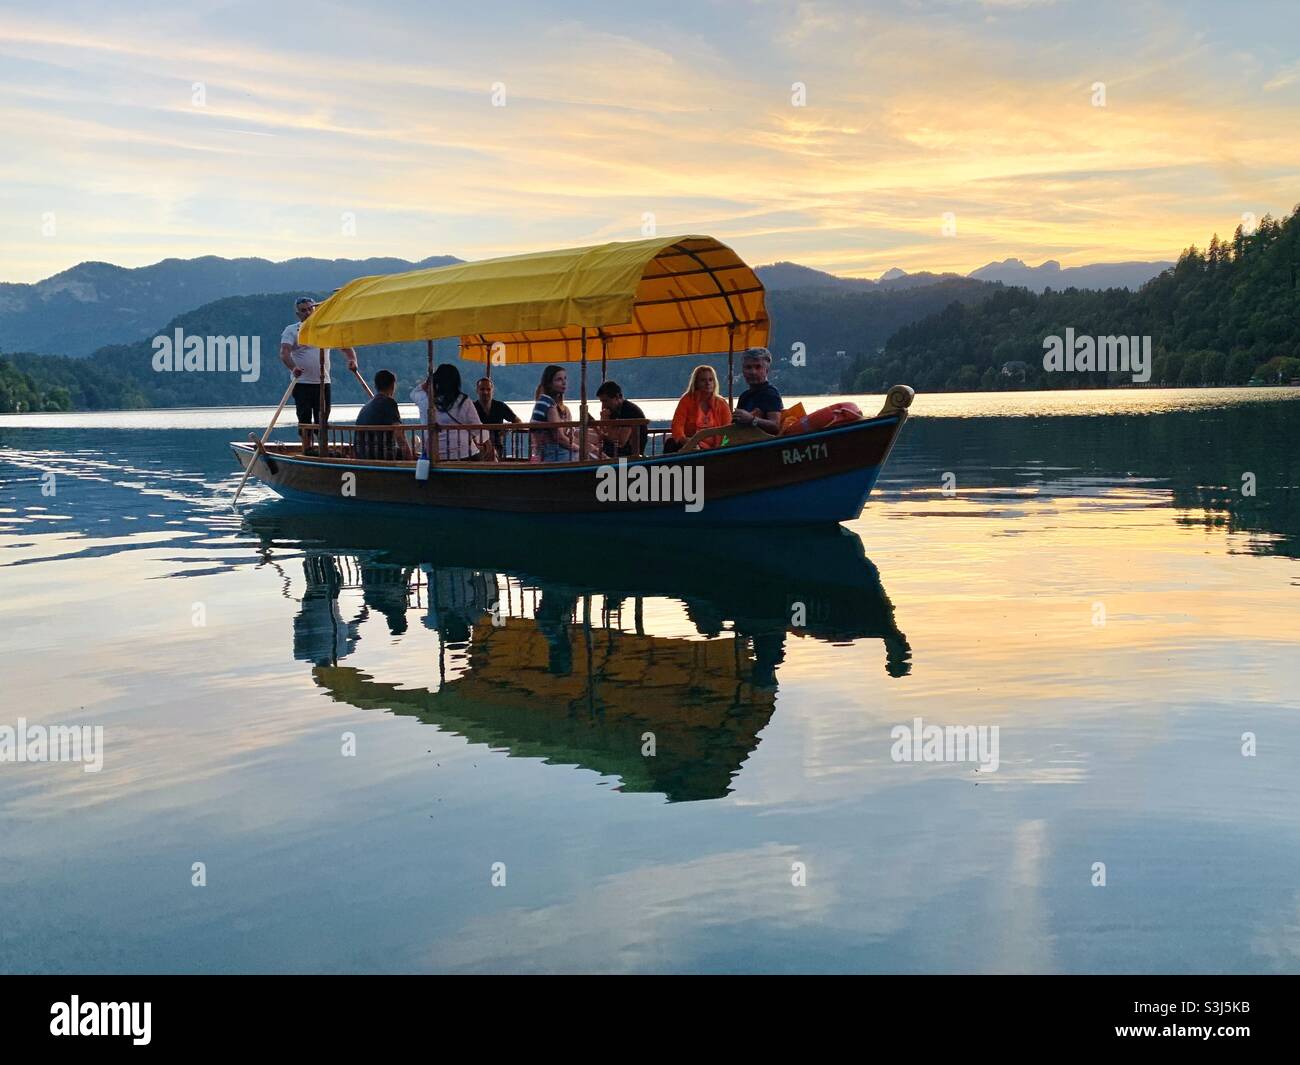 Boat at sunset on lake bled Stock Photo